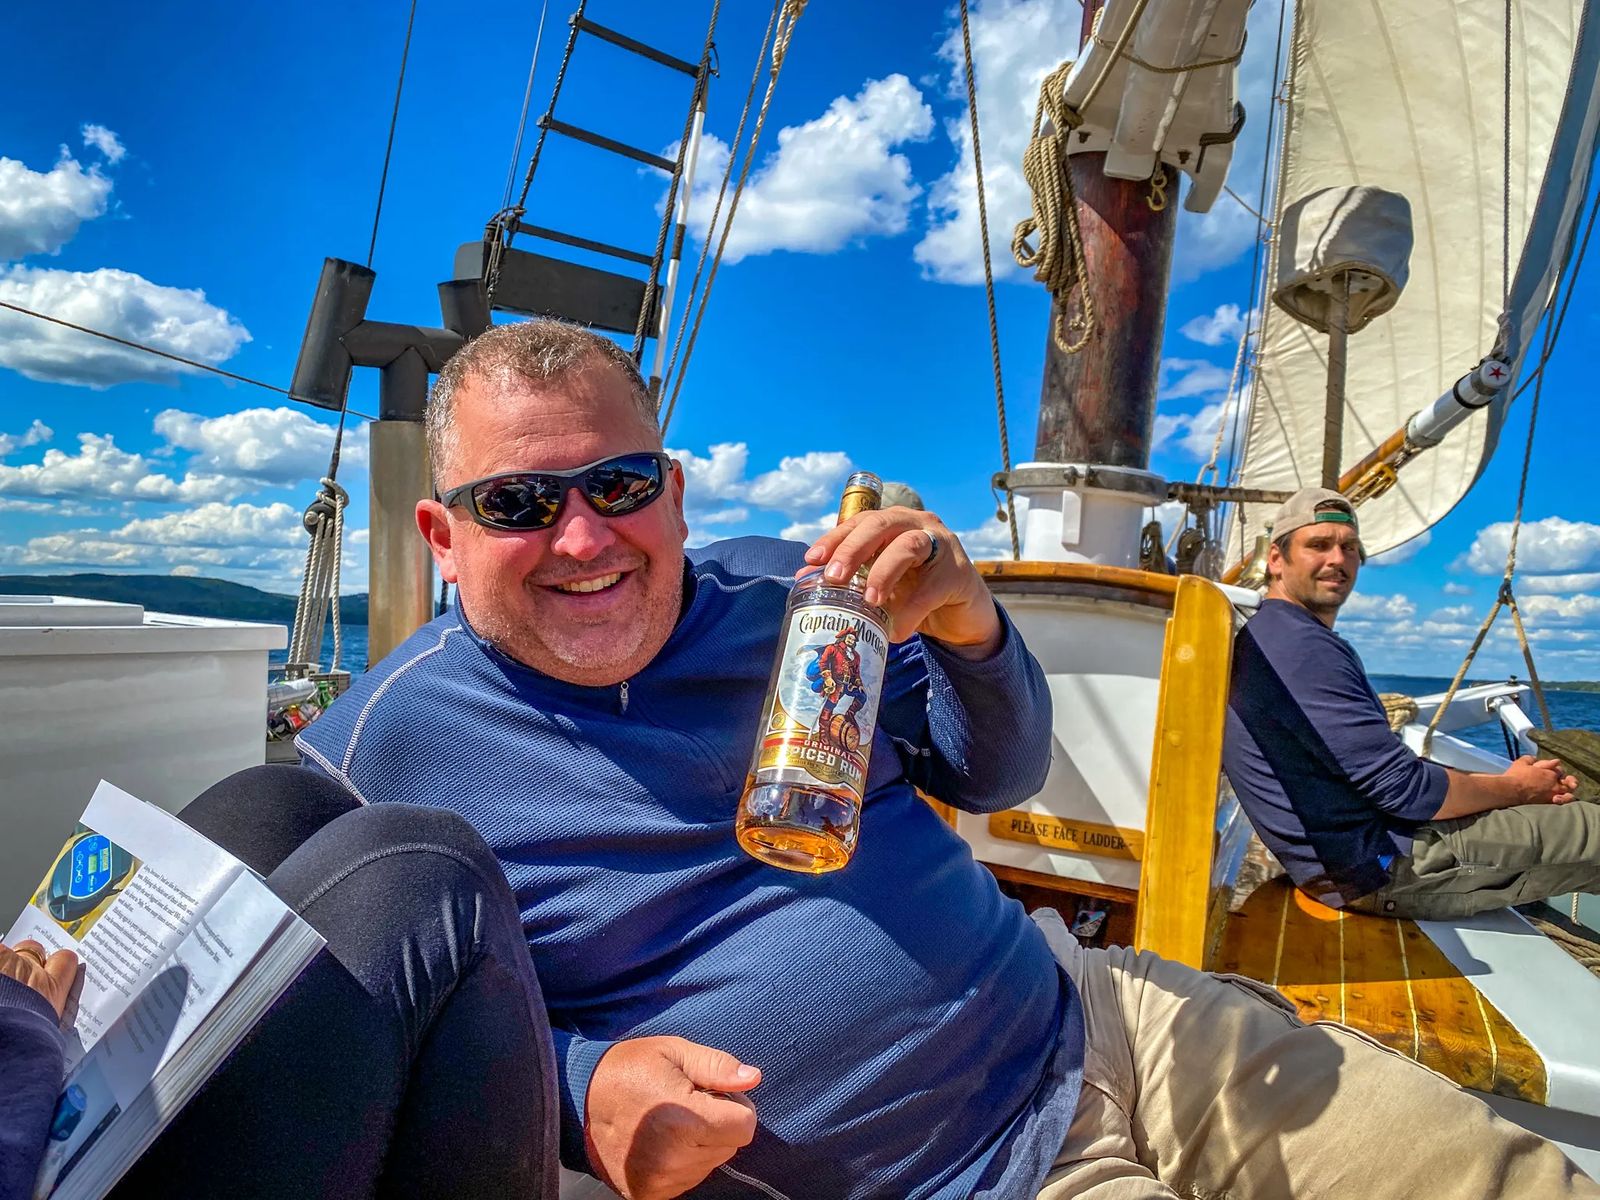 Sailing the Islands of Maine with a passenger holding a Rum bottle